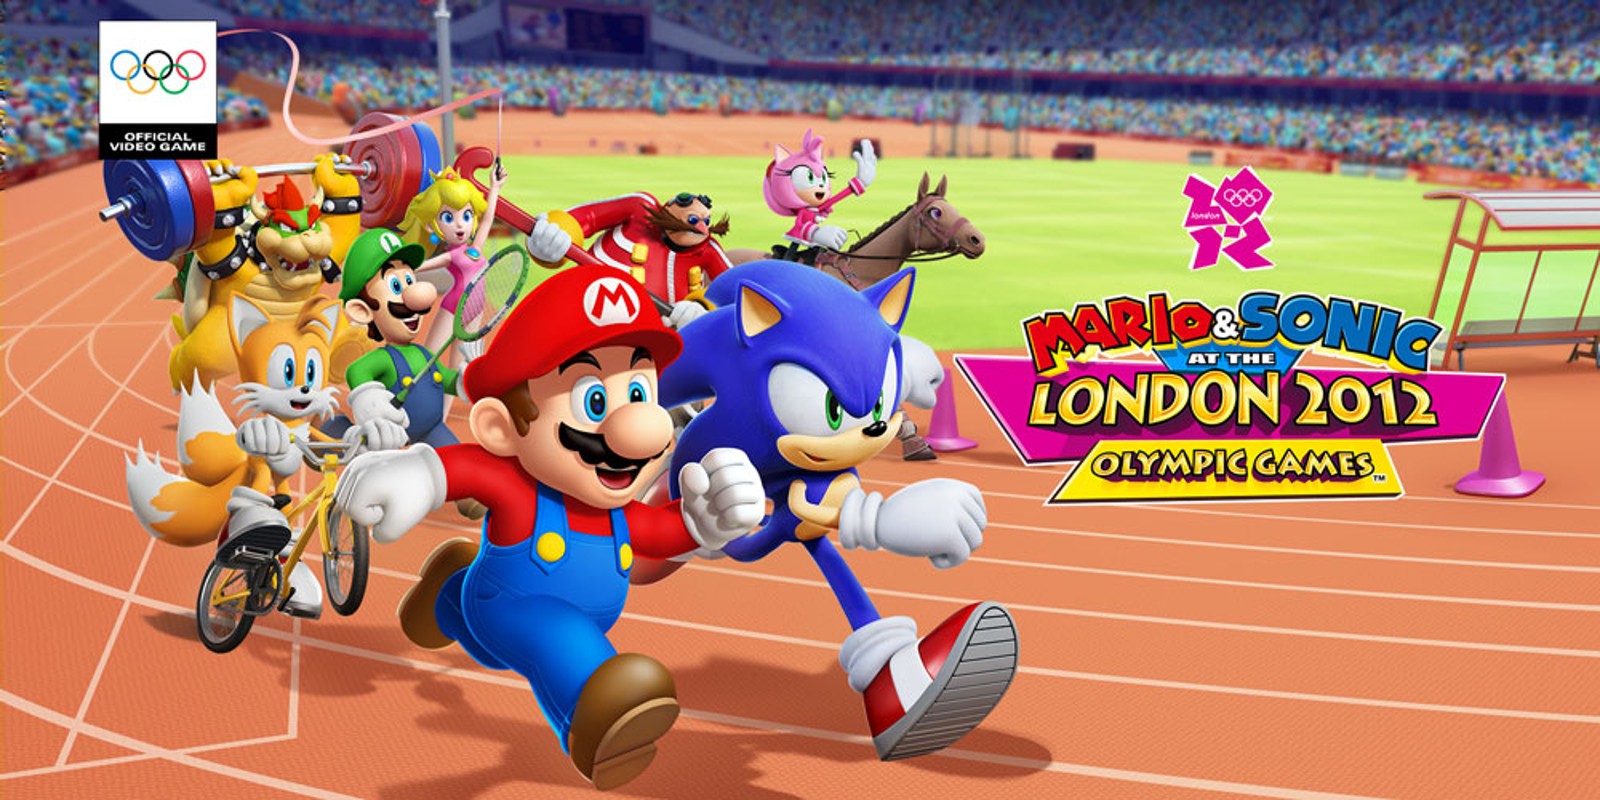 What Happened To Mario And Sonic At The Olympic Games